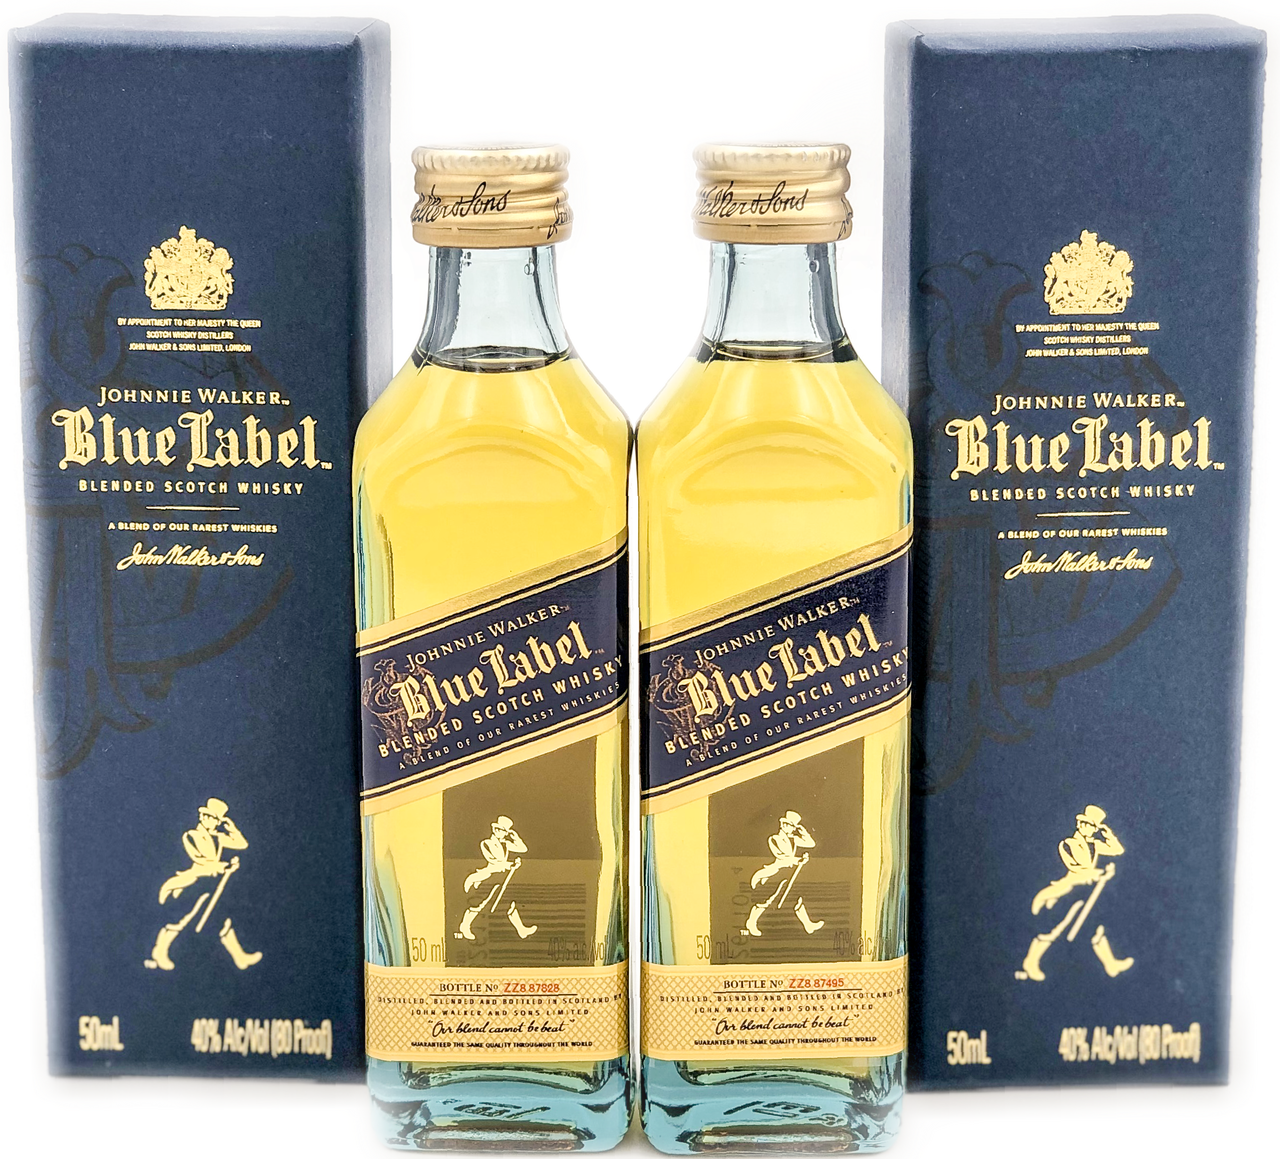 Johnnie Walker Blue Label Blended Scotch Whisky with Gift Box